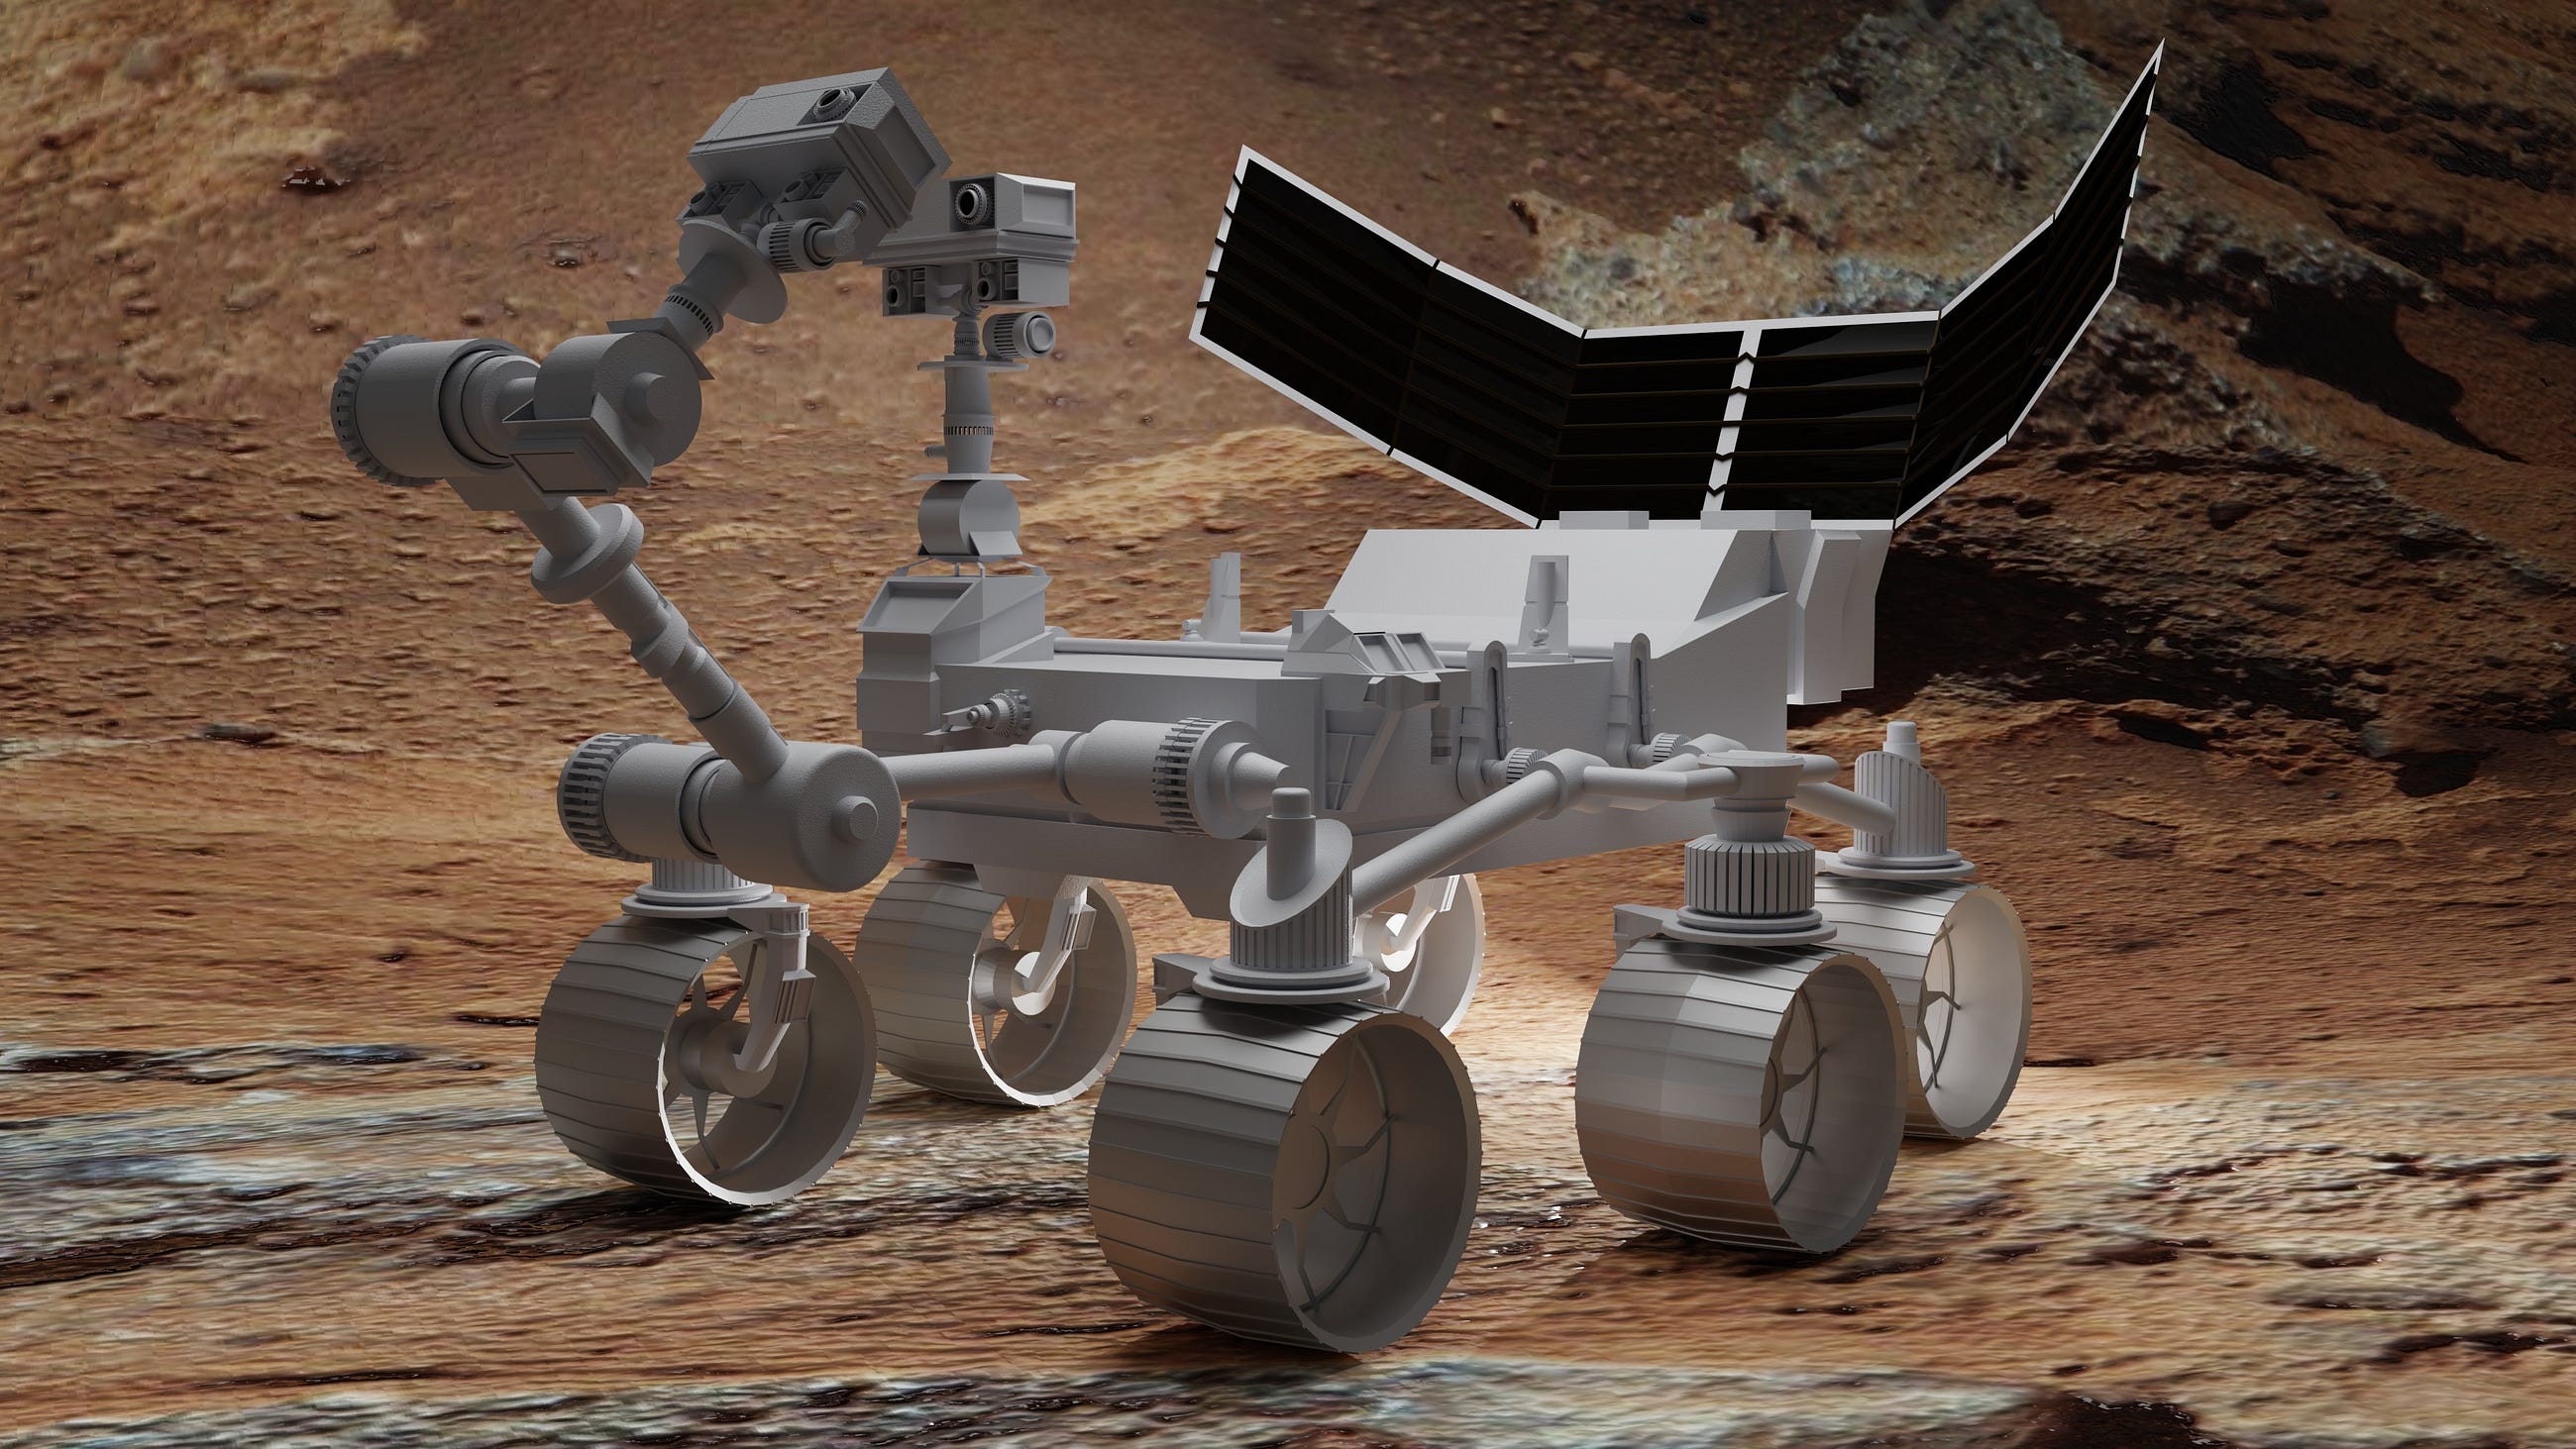 China’s rover on Mars discovers evidence that water existed on Mars Mo